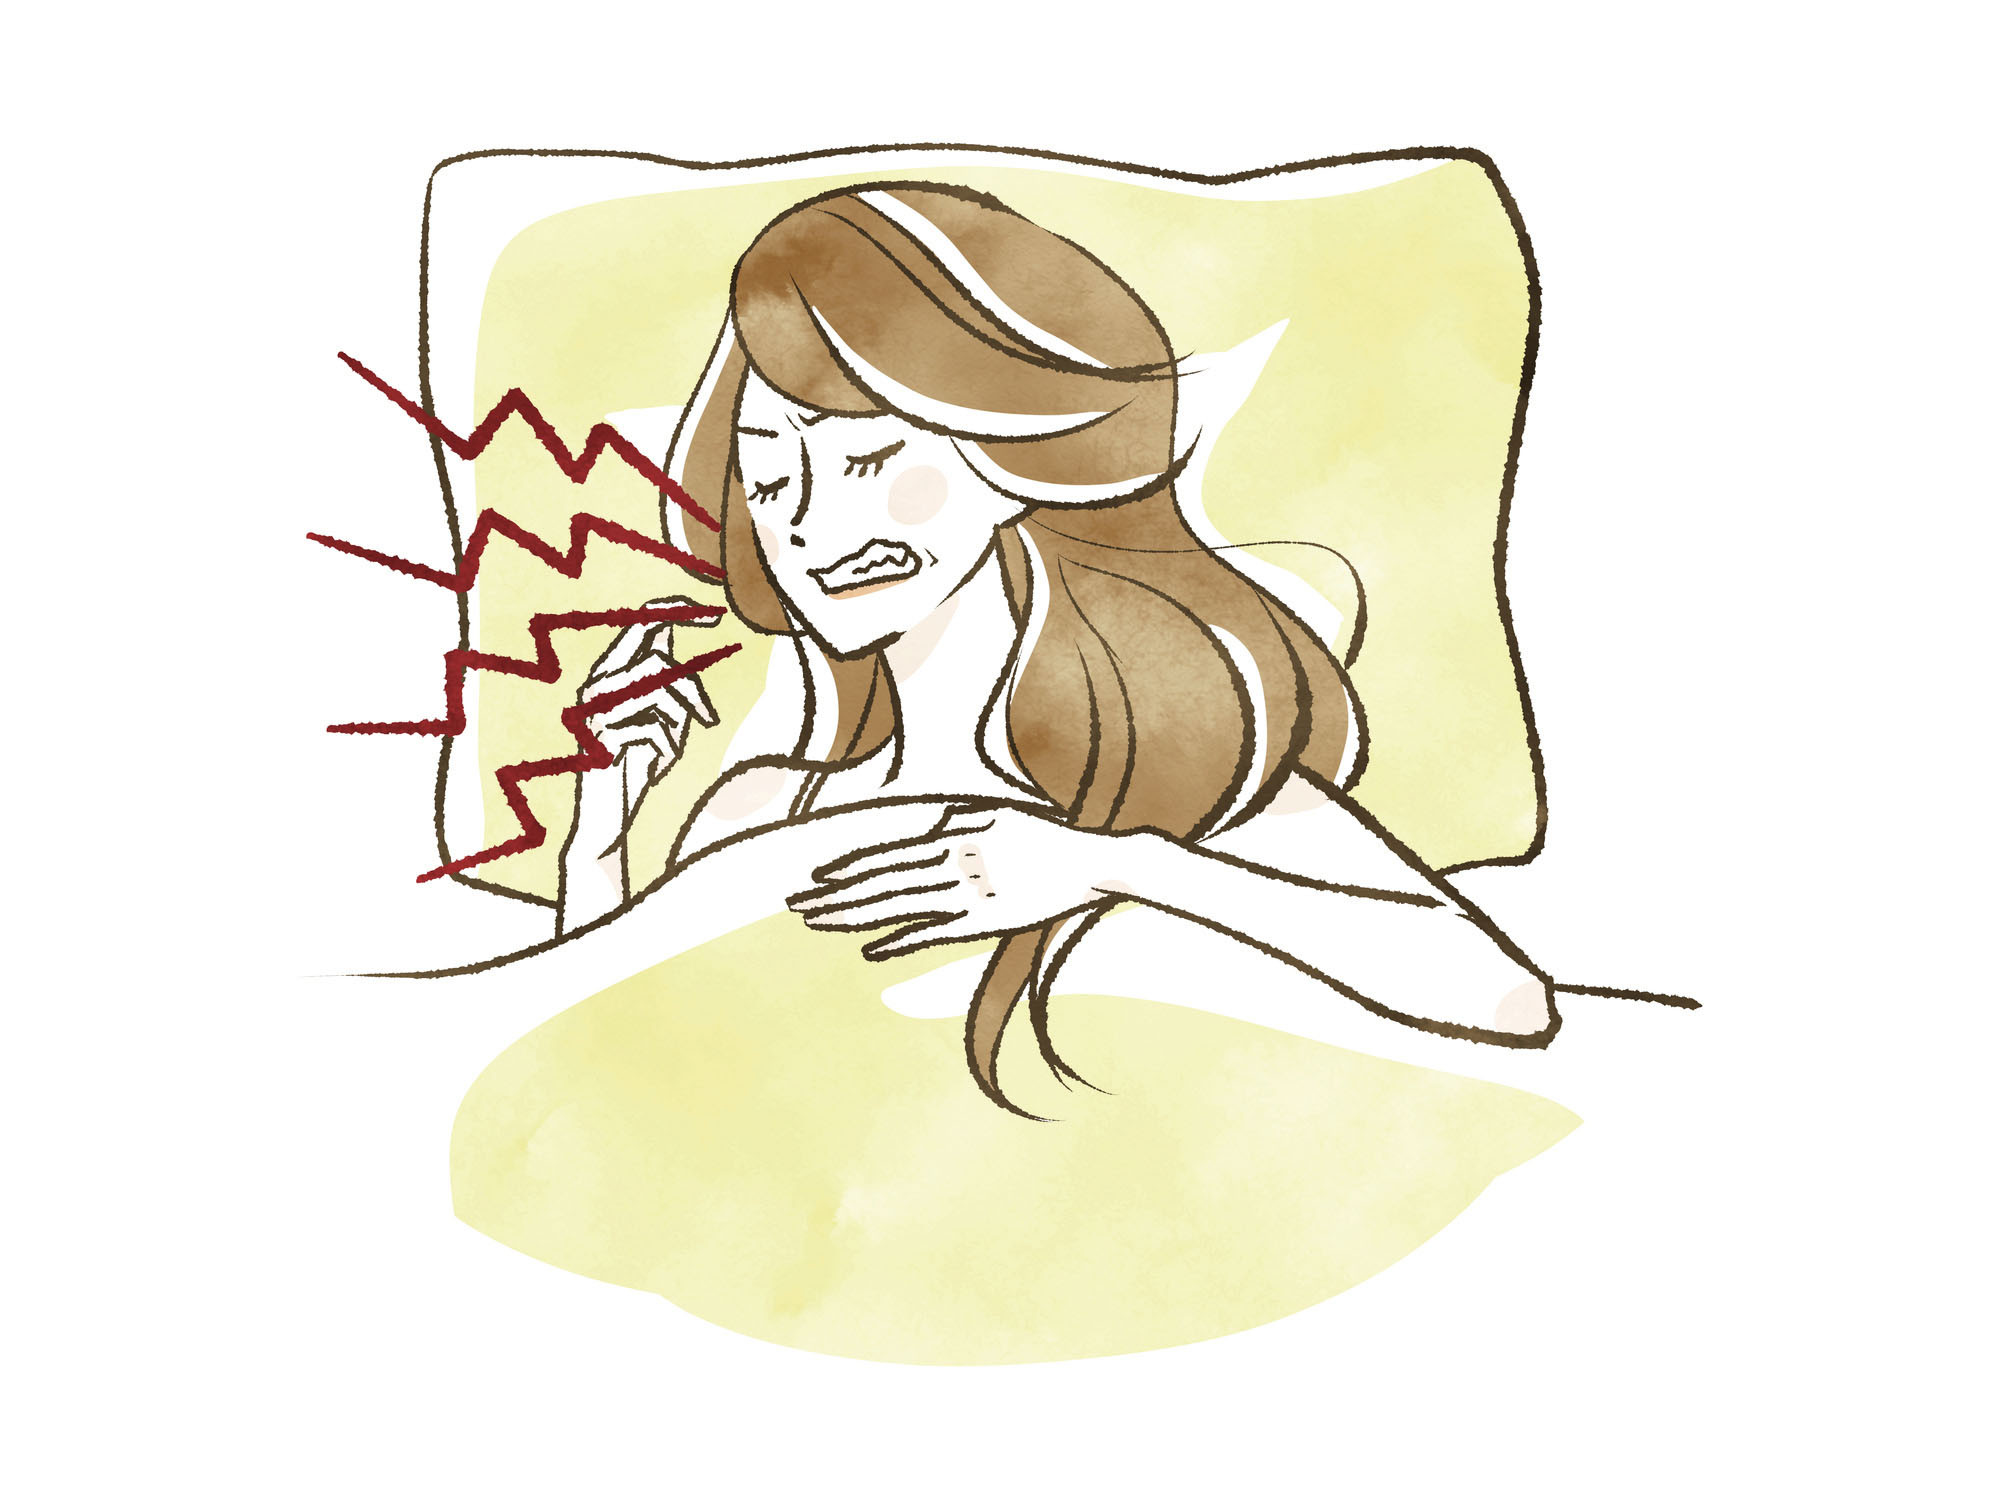 illustration of a woman in bed with lines radiating from her neck symbolizing pain